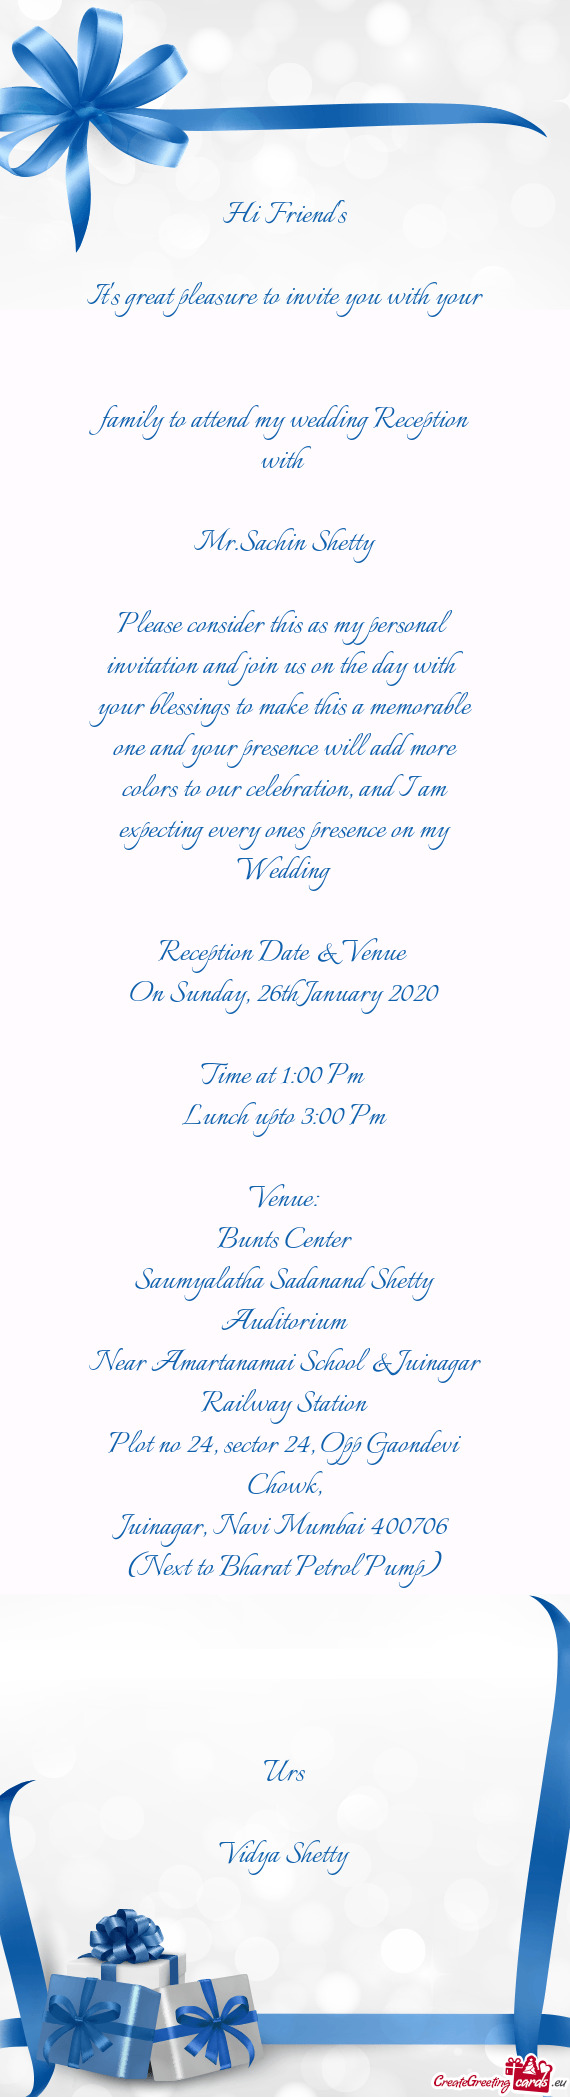 Family to attend my wedding Reception with